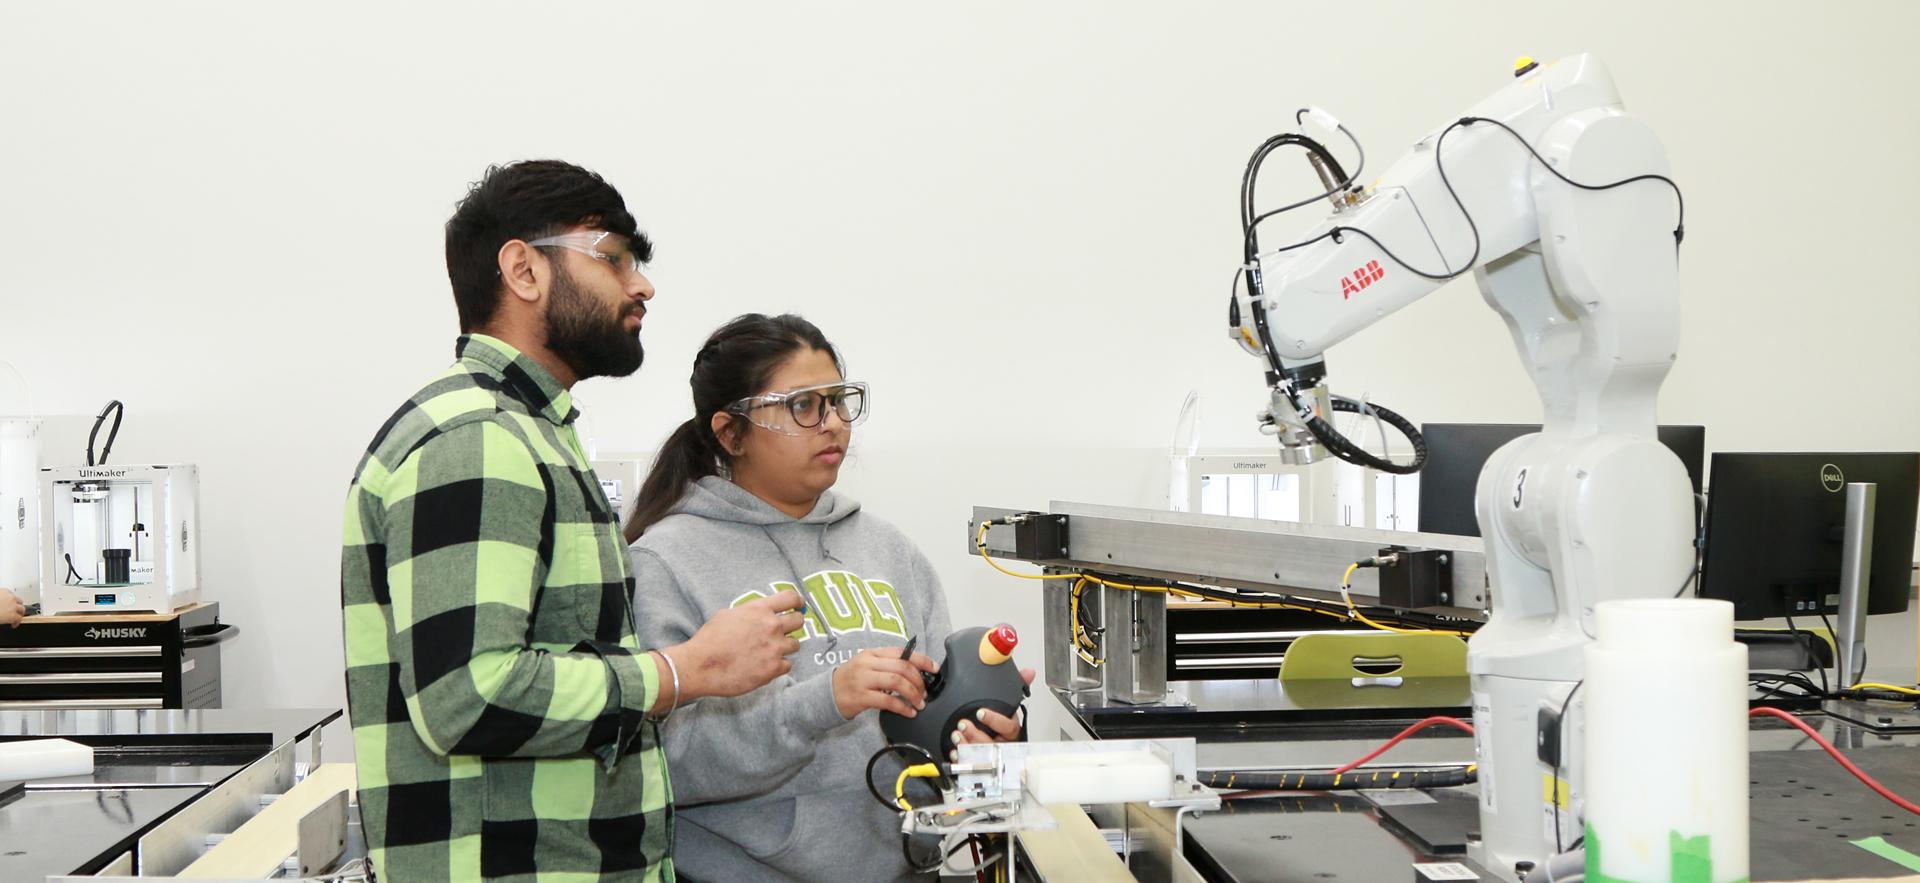 Bachelor of Engineering - Mechatronics students working in the robotics and engineering lab